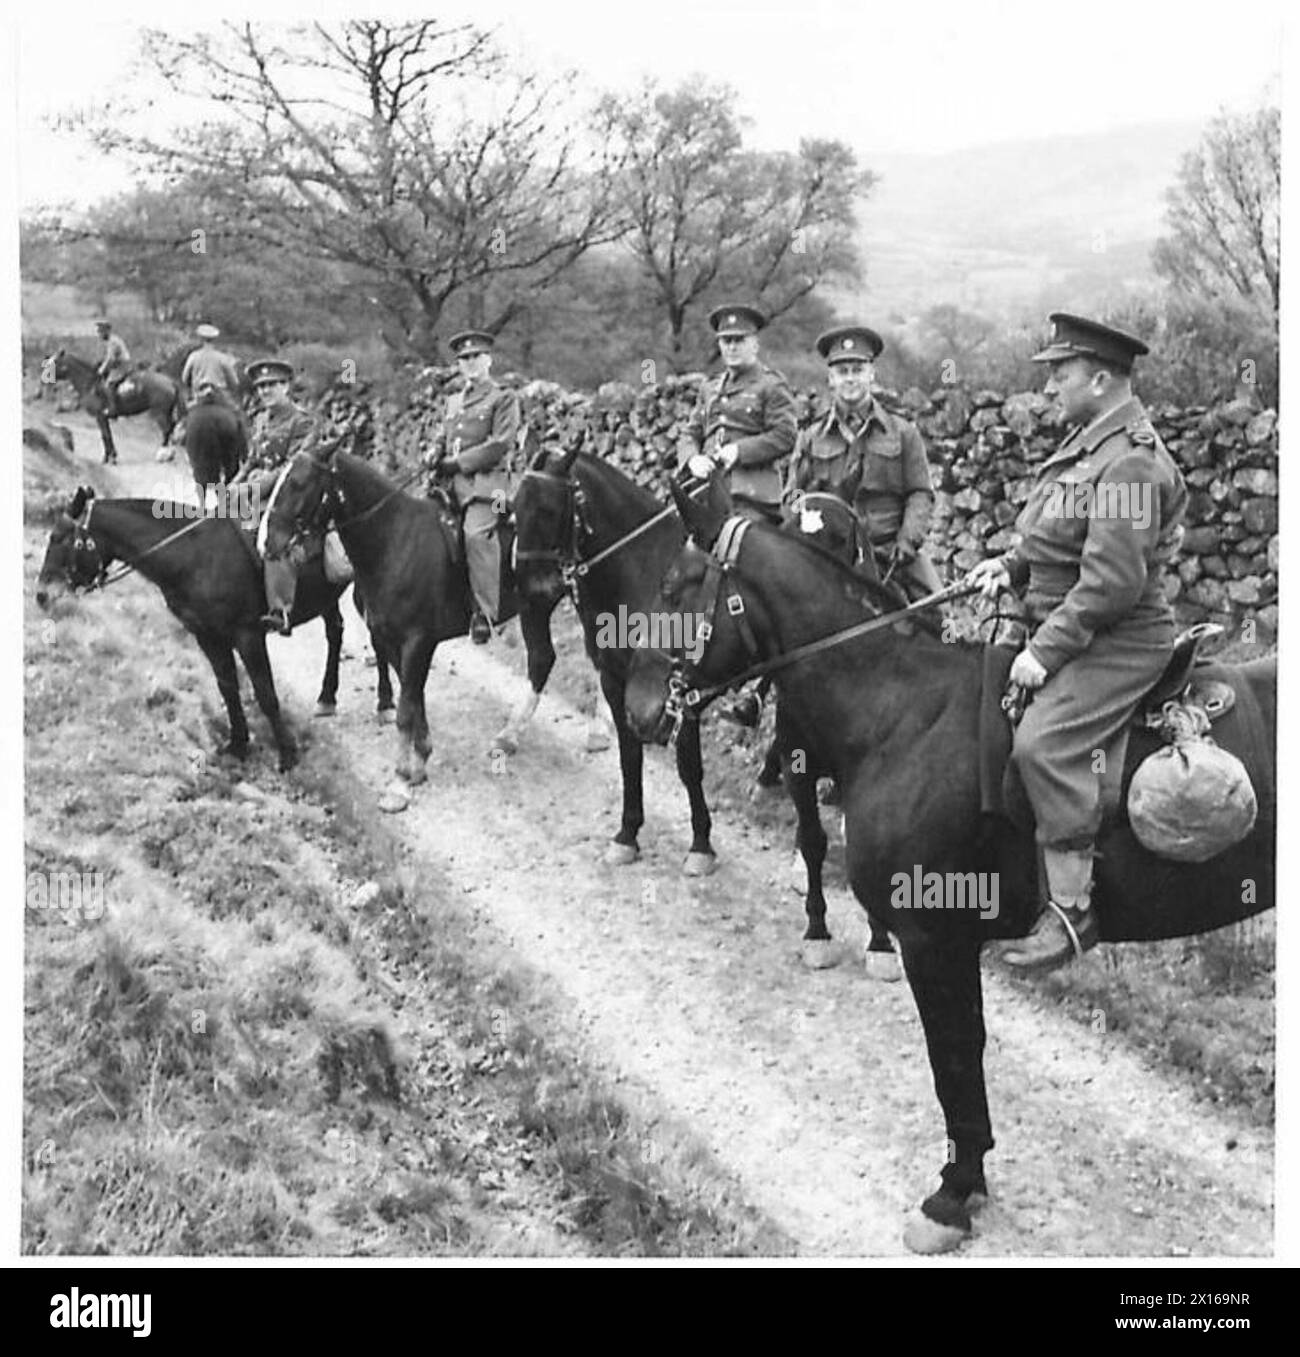 A MOUNTAIN BATTERY IN WALES - War Correspondents seen on horseback. Left to right - H.C. Taylor (Liverpool Daily Post); L.W.Jones (Liverpool Evening Express)., W.F. Tewson (Manchester Evening News) R.W. Reid (BBC Manchester) and J.H. Morgan (Western Mail, Cardiff) British Army Stock Photo